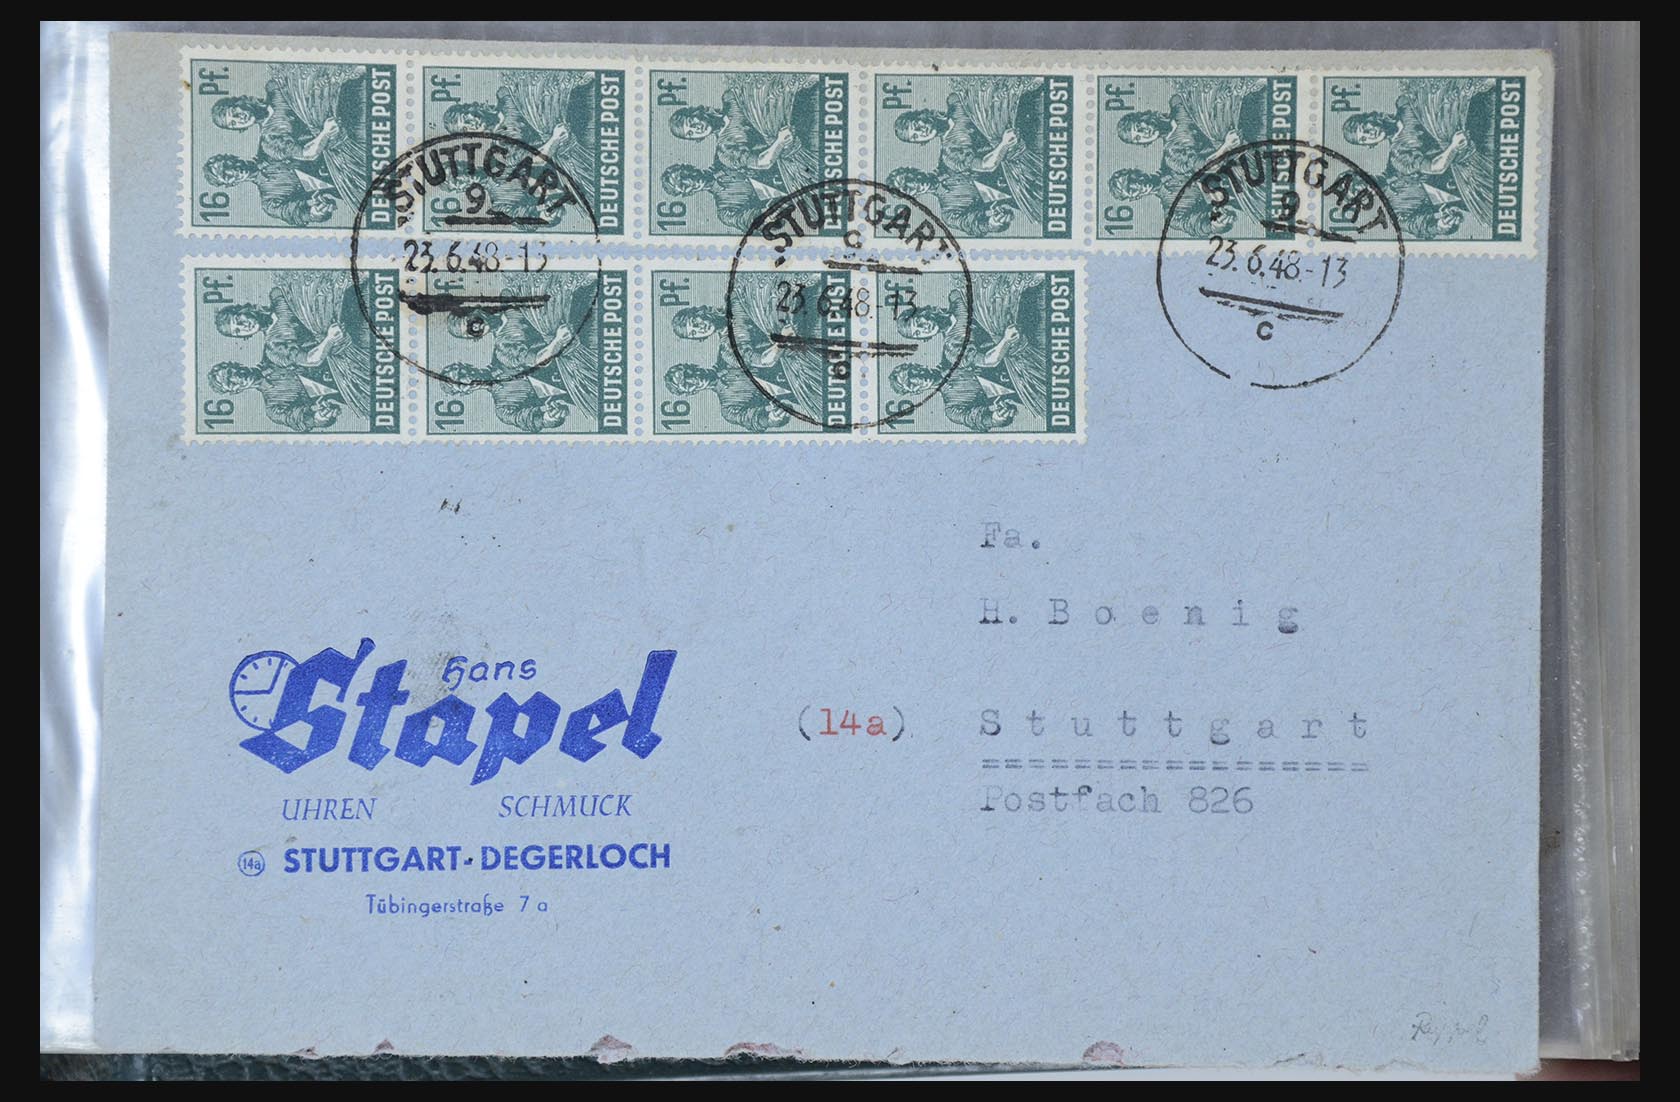 31581 033 - 31581 Germany covers and FDC's 1945-1981.